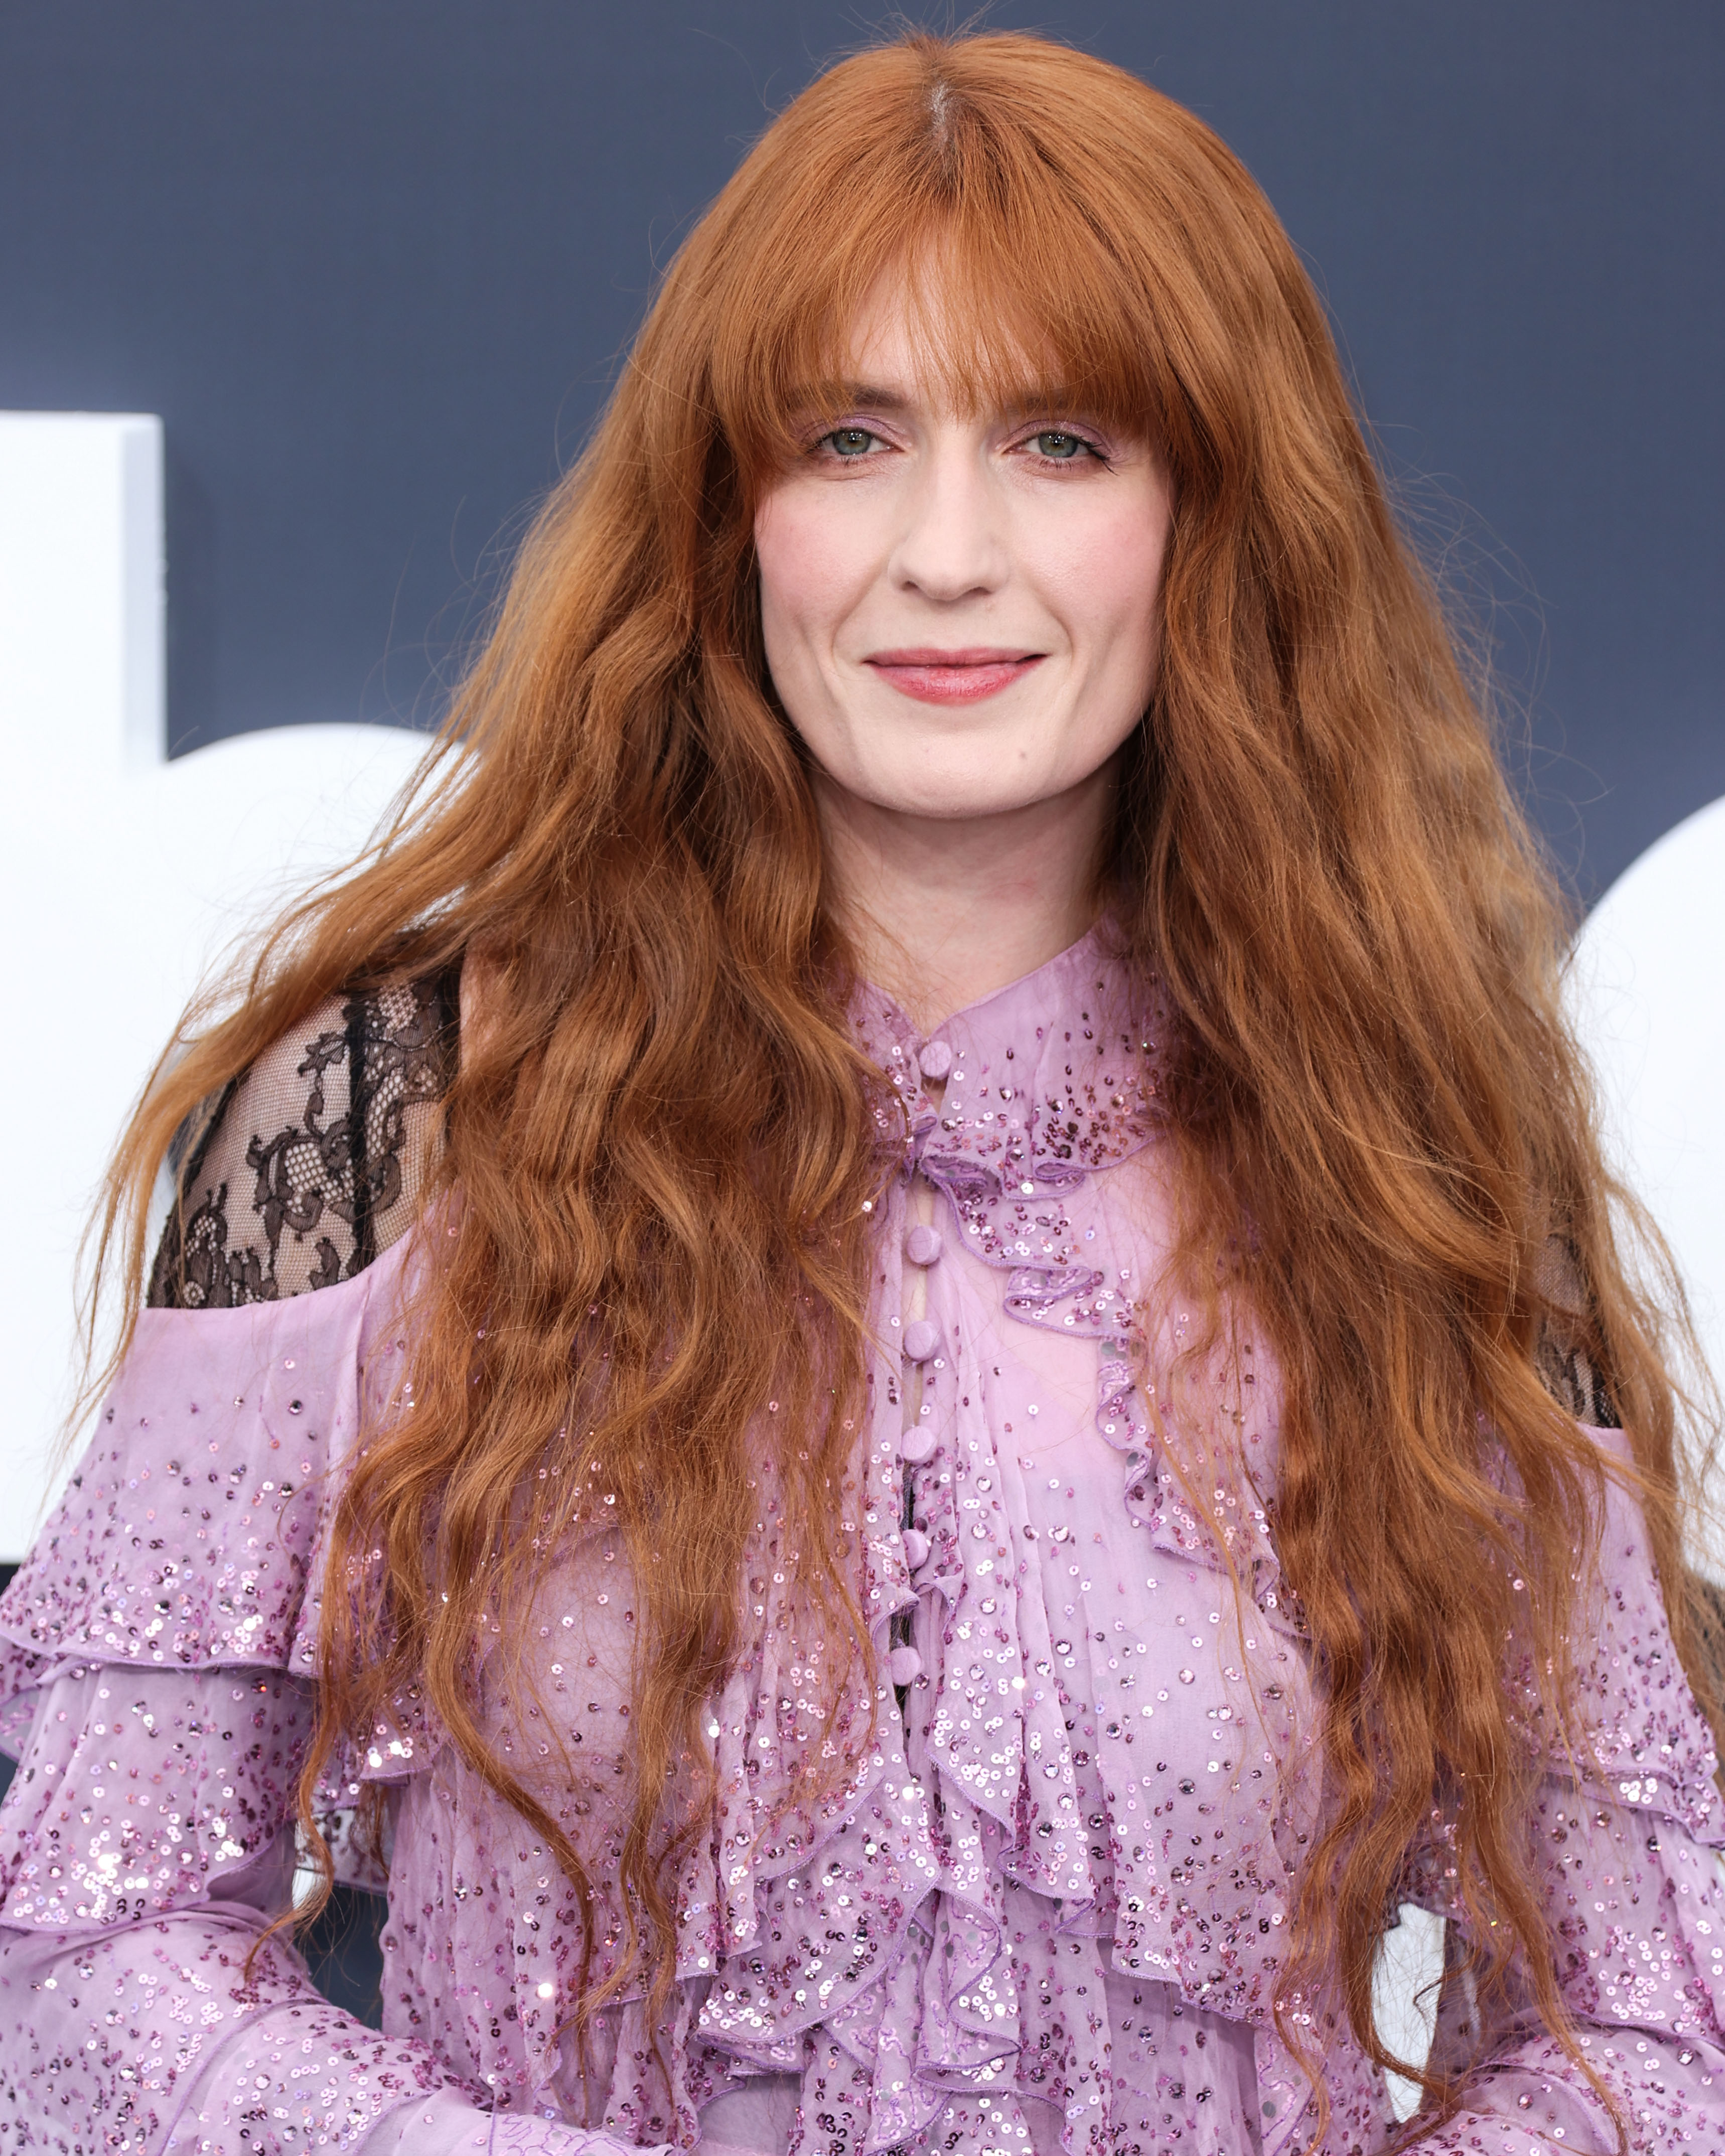 Florence Welch - but did she sing Boom Clap?